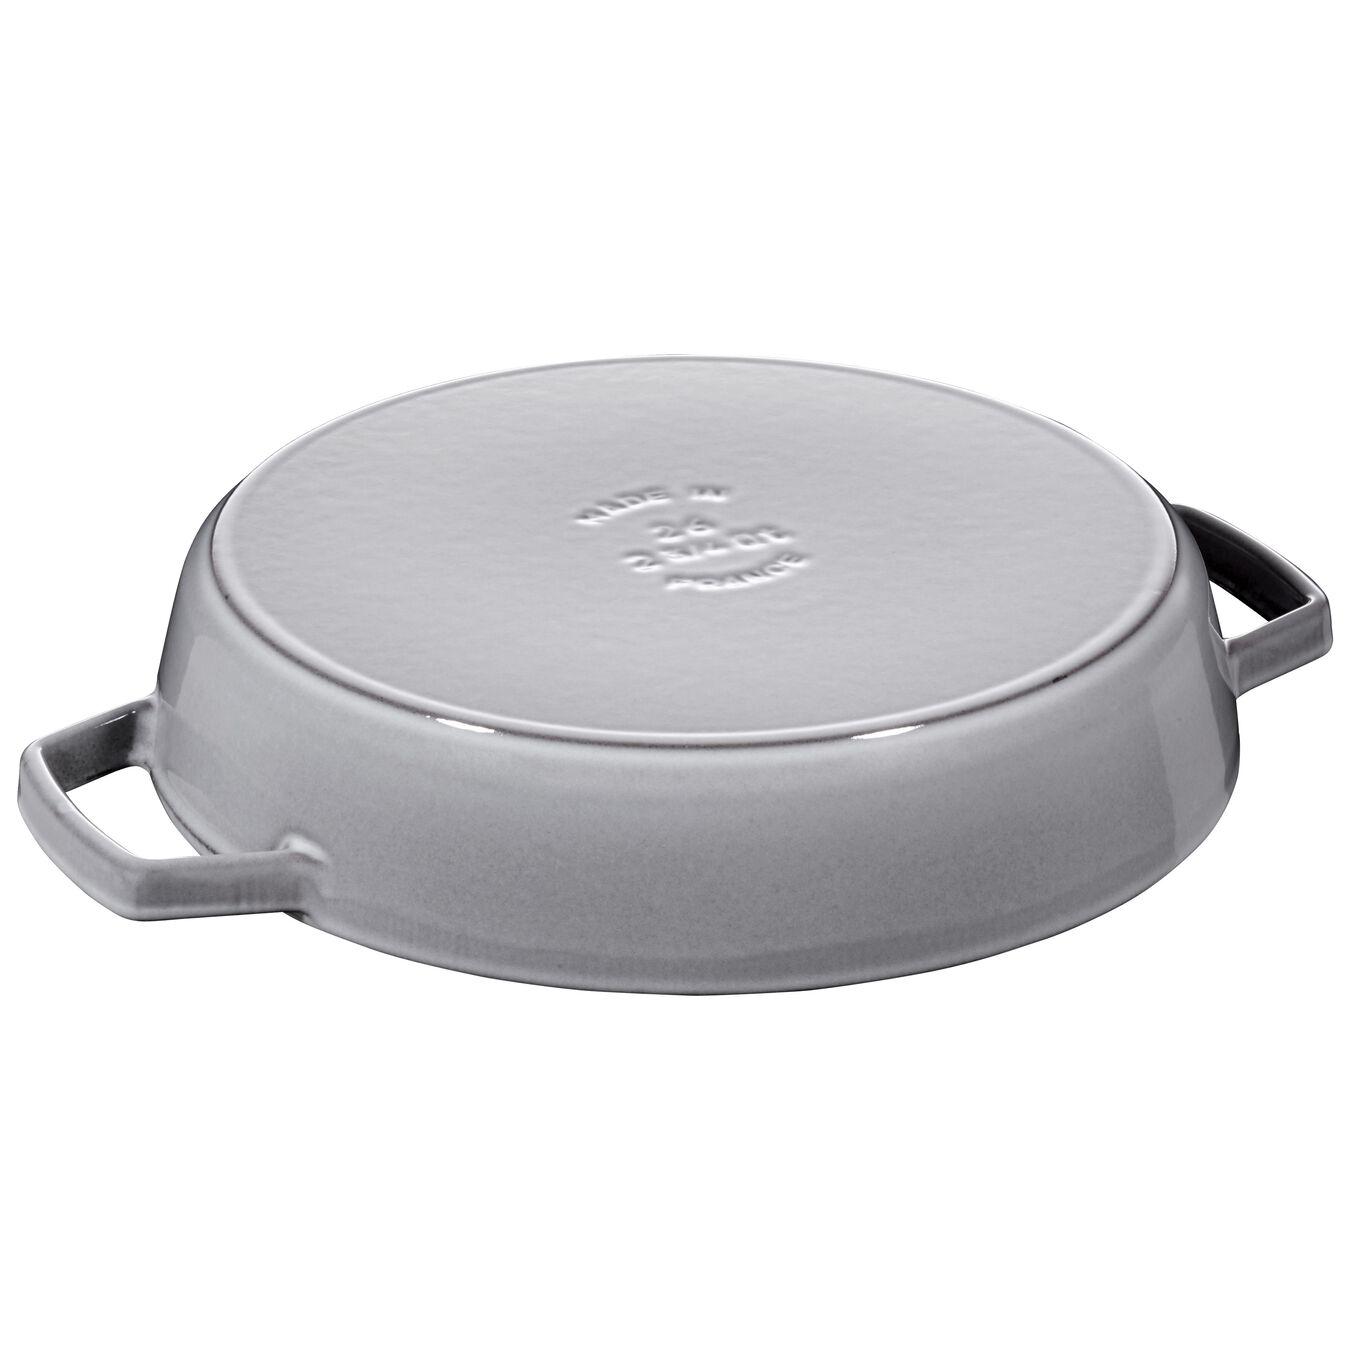 26 cm / 10 inch cast iron Frying pan, graphite-grey,,large 2